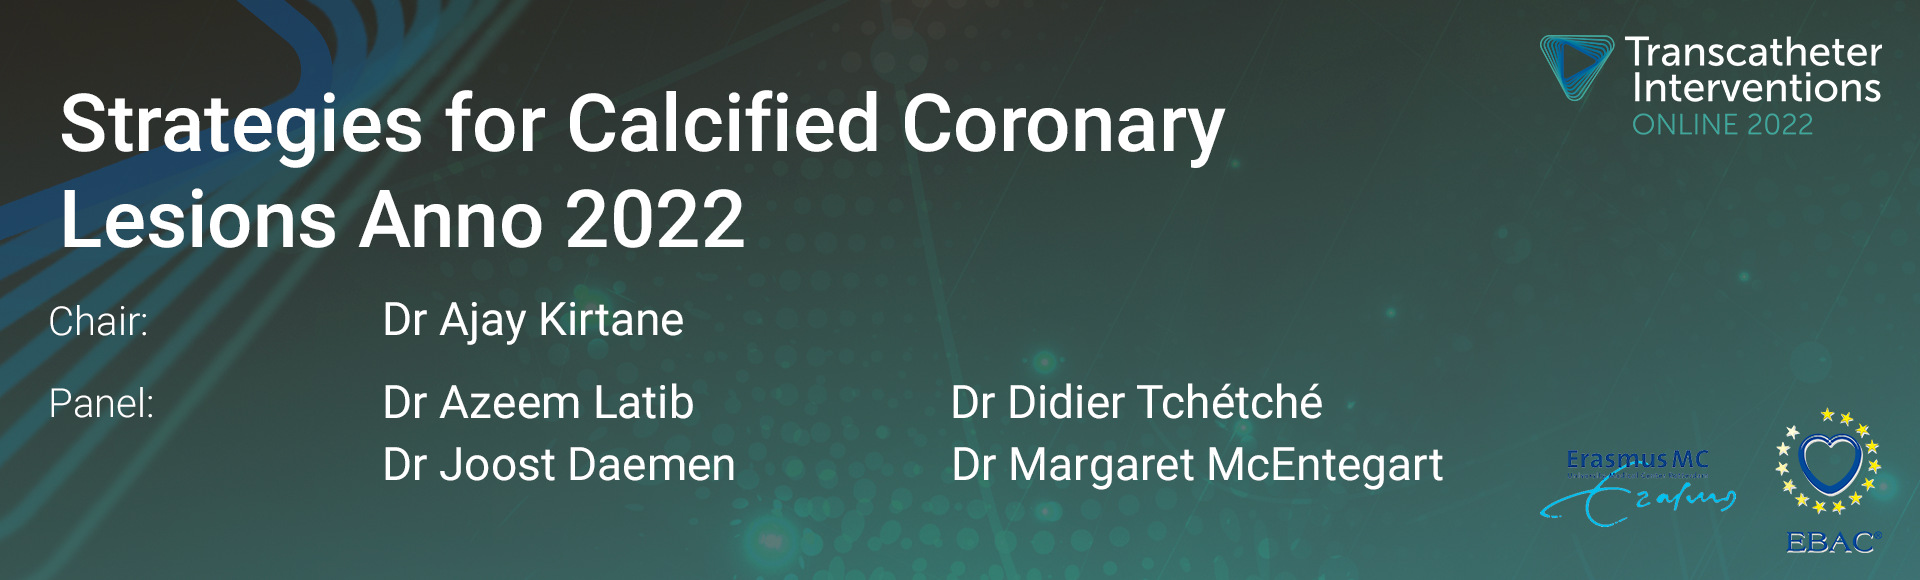 TIO 2022 - Session 2.1: Strategies For Calcified Coronary Lesions Anno 2022